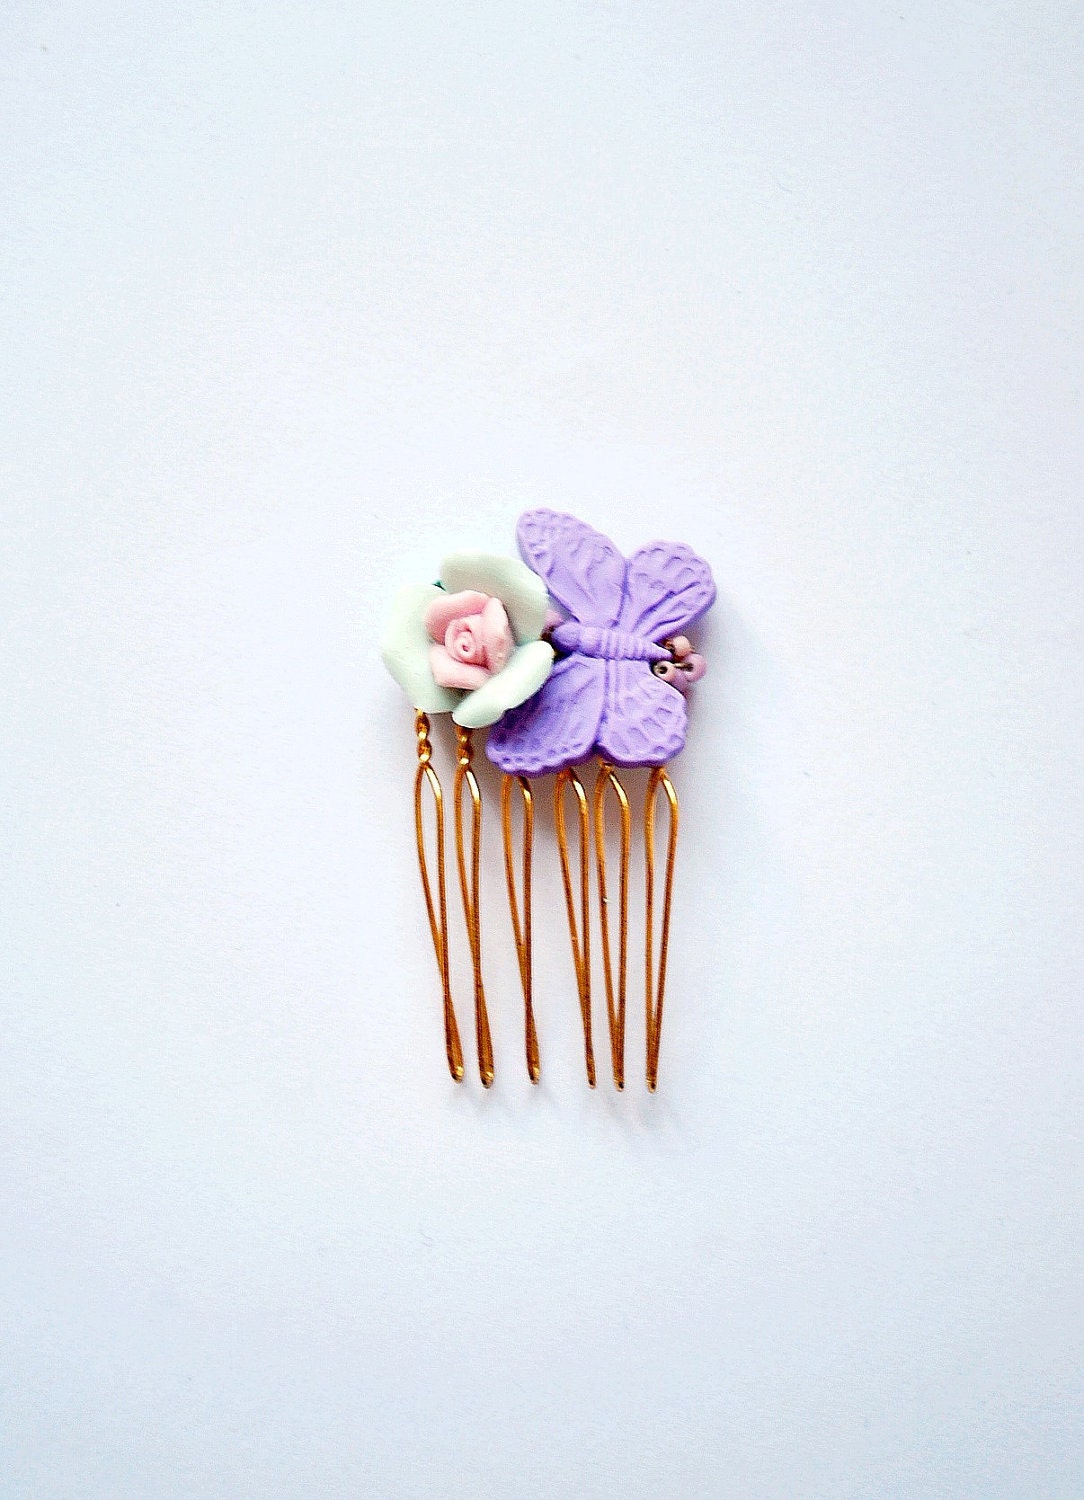 Little hair comb with a pastel rose and a butterfly - a romantic hair adornment piece in mint, pastel rose and lavender, a graceful detail - missbabacilu